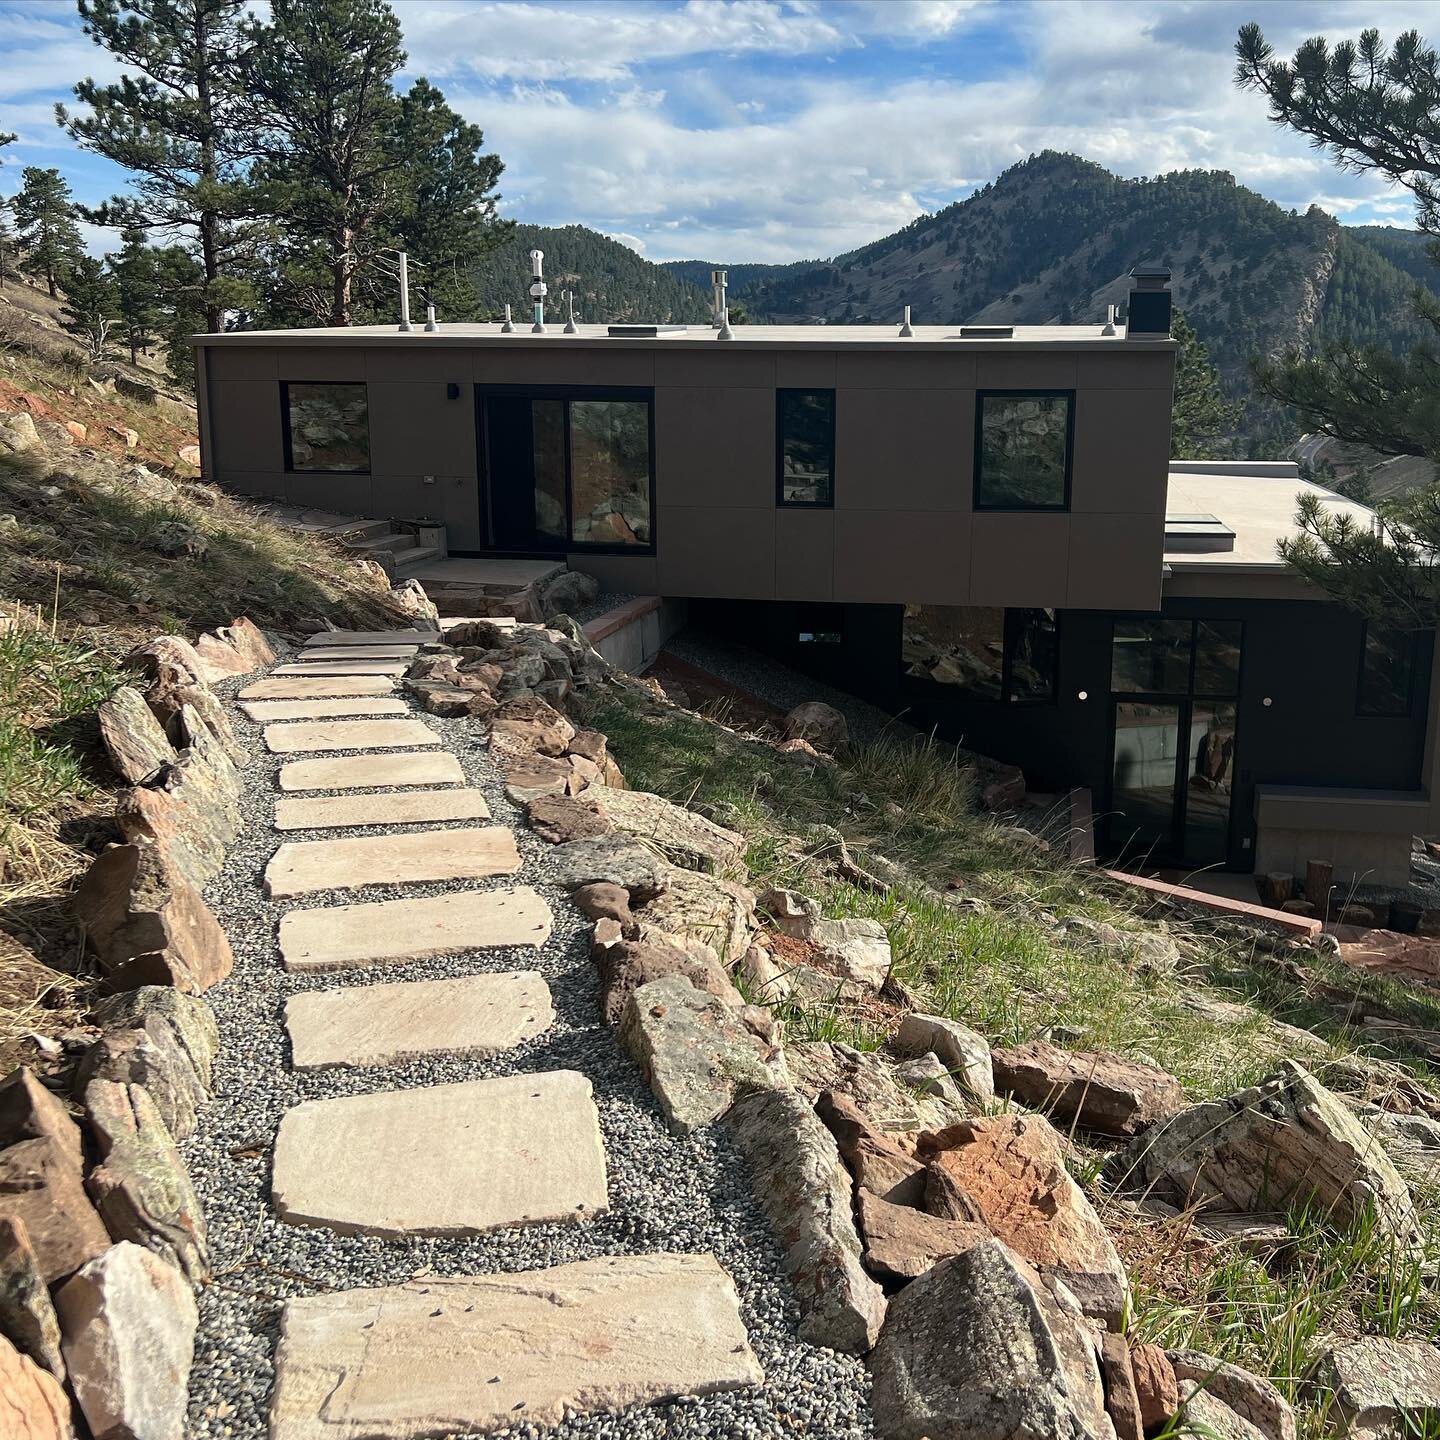 My upper path is finally complete, just in time for the emerging green of Spring! A winter project, the upper path now leads from the top floor out along the hillside to a special outdoor hot tub area where it then hooks into the hiking trails I&rsqu